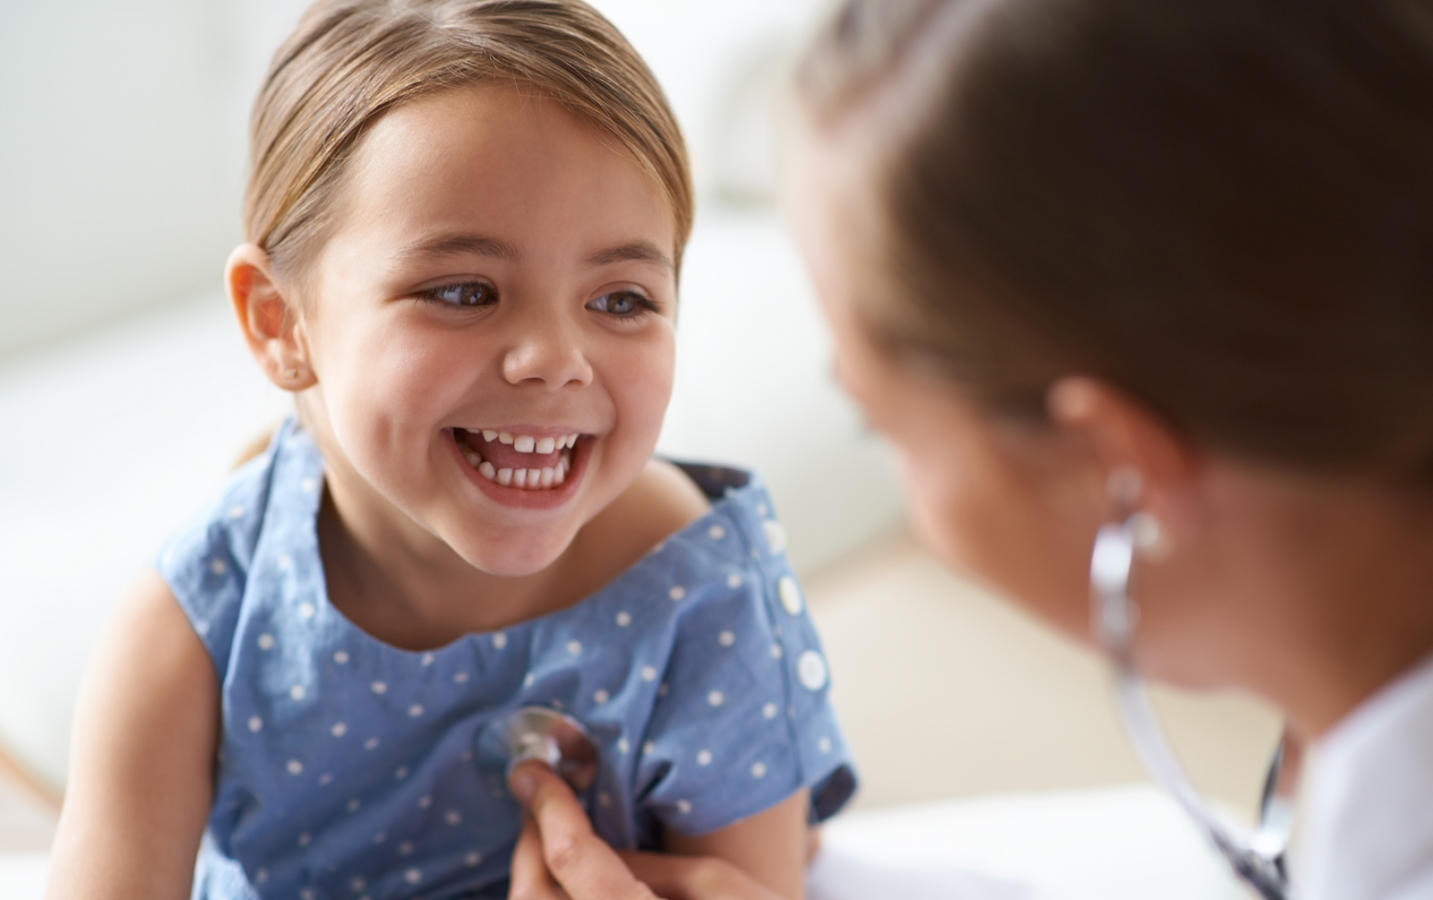 Cropped shot of an adorable young girl with her pediatrician